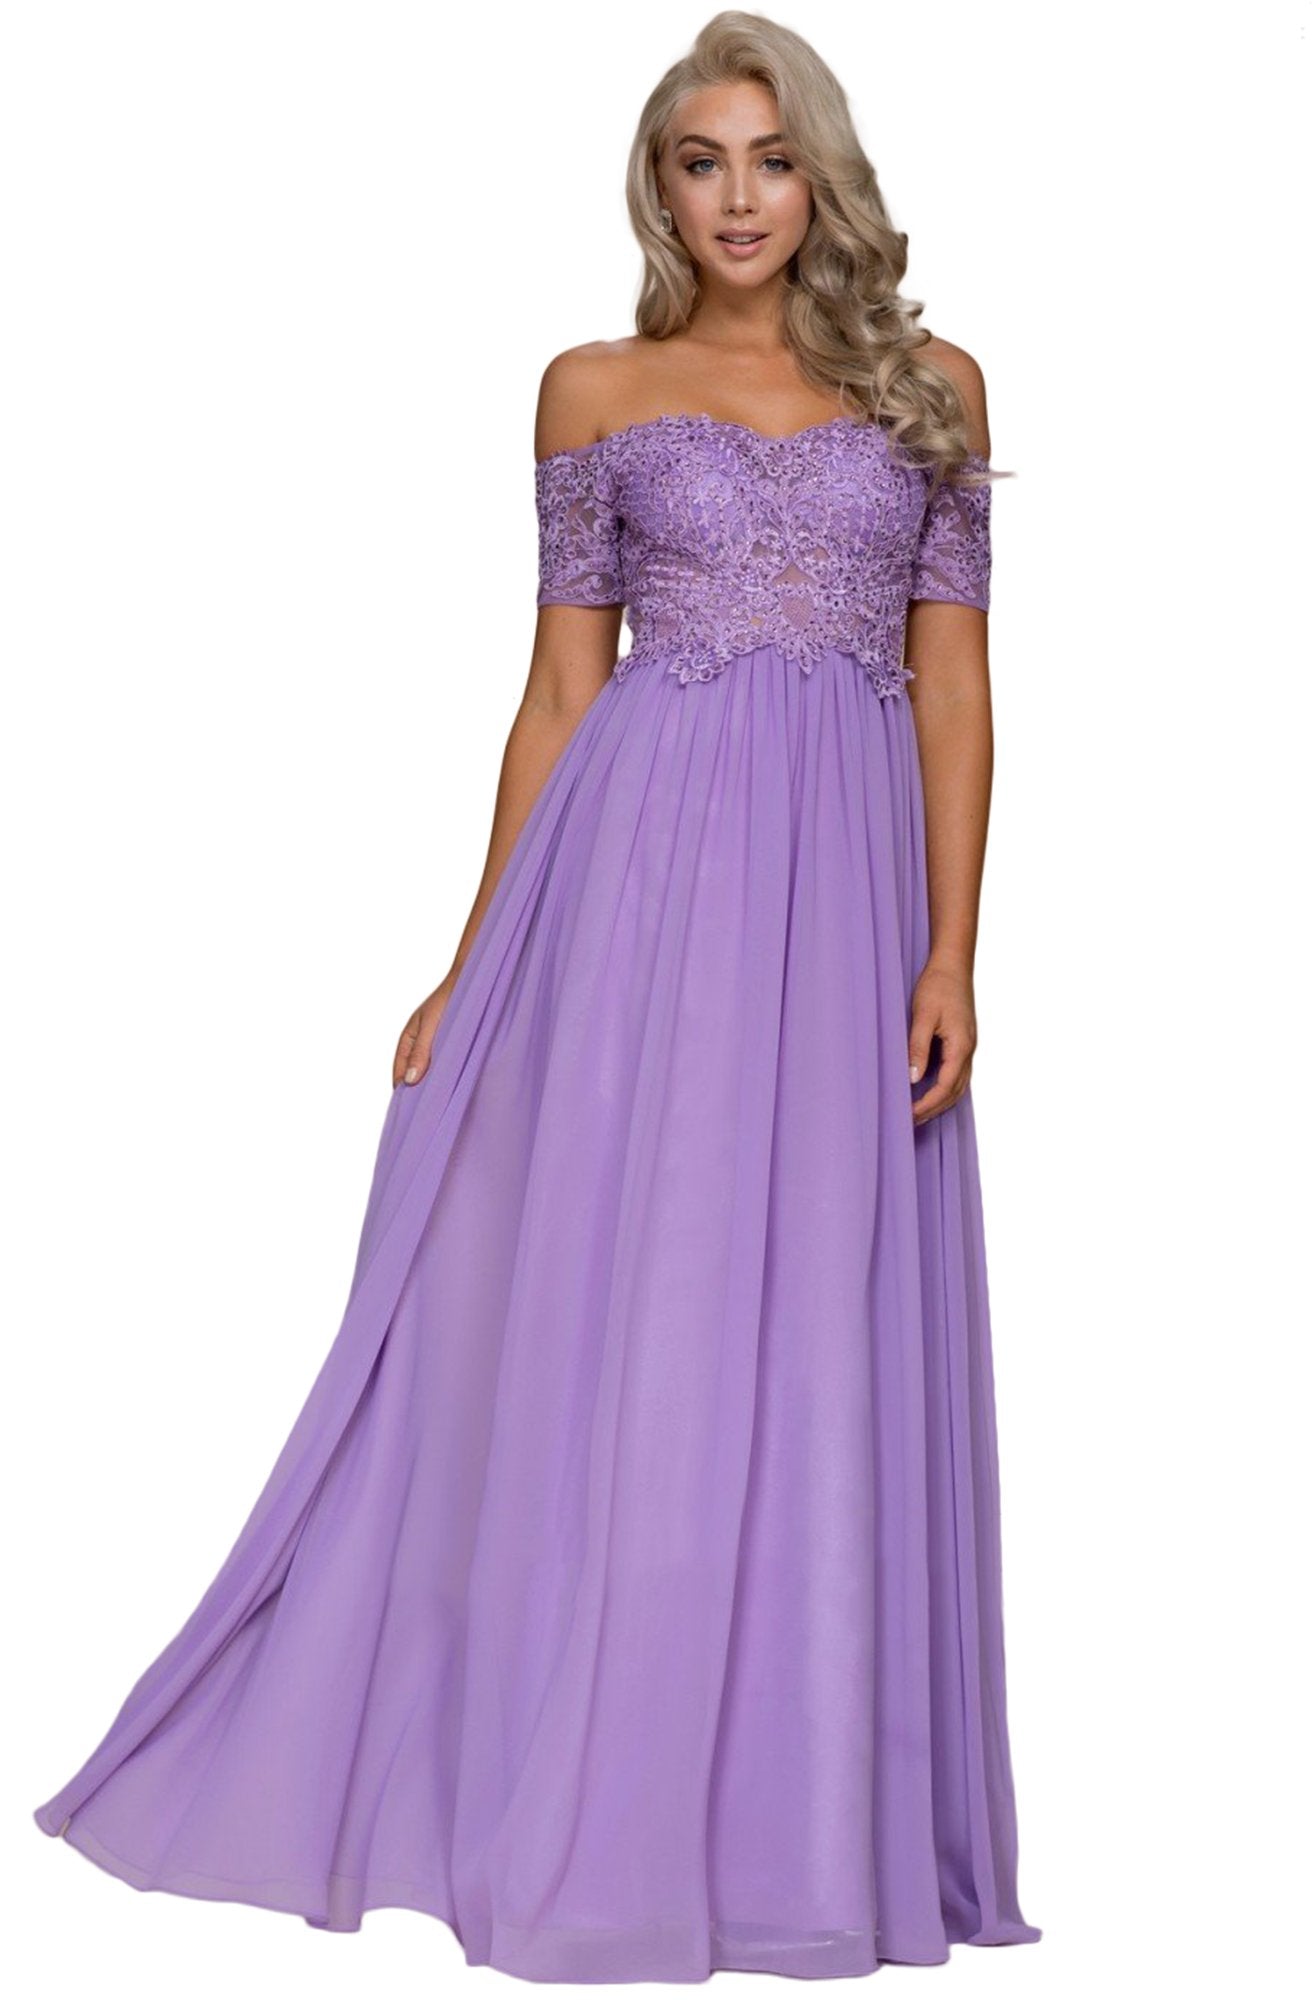 Nox Anabel - A061 Off Shoulder Lace Illusion Bodice Gown In Purple